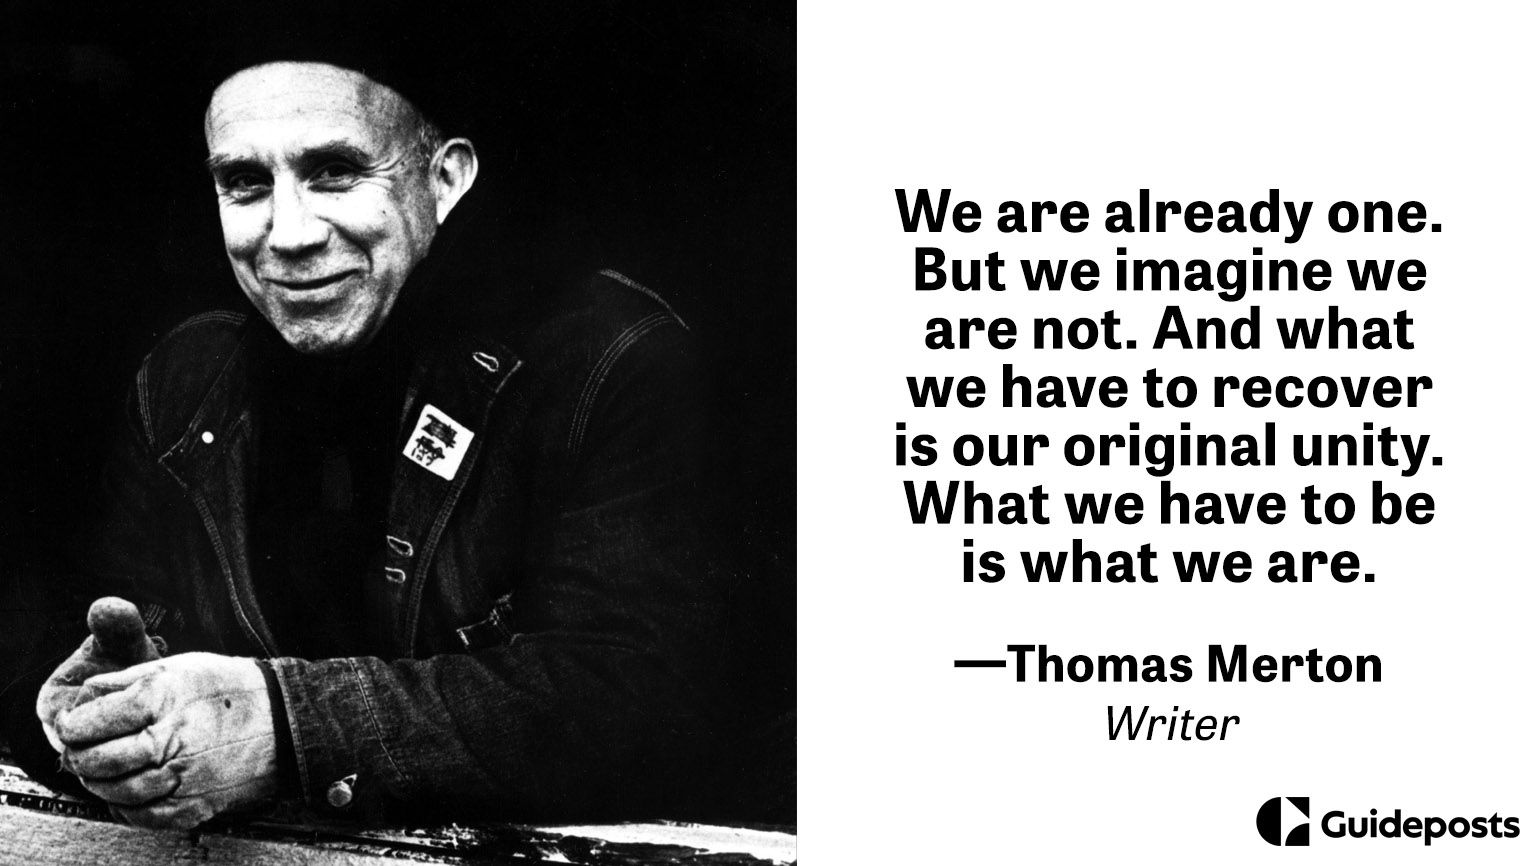 We are already one. But we imagine we are not. And what we have to recover is our original unity. What we have to be is what we are.  —Thomas Merton